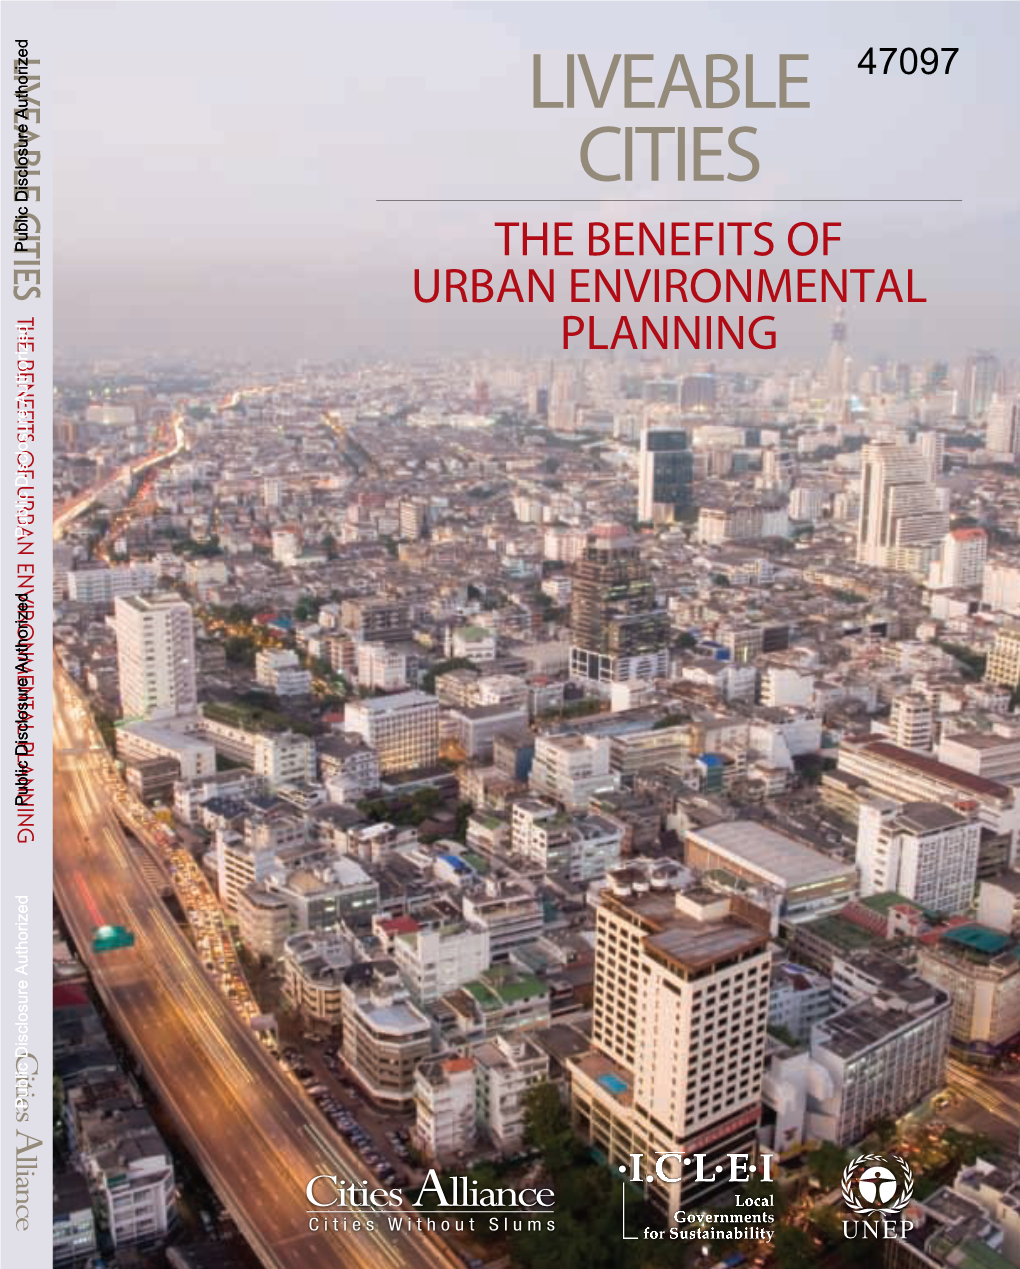 Liveable Cities the Benefits of Urban Environmental Planning